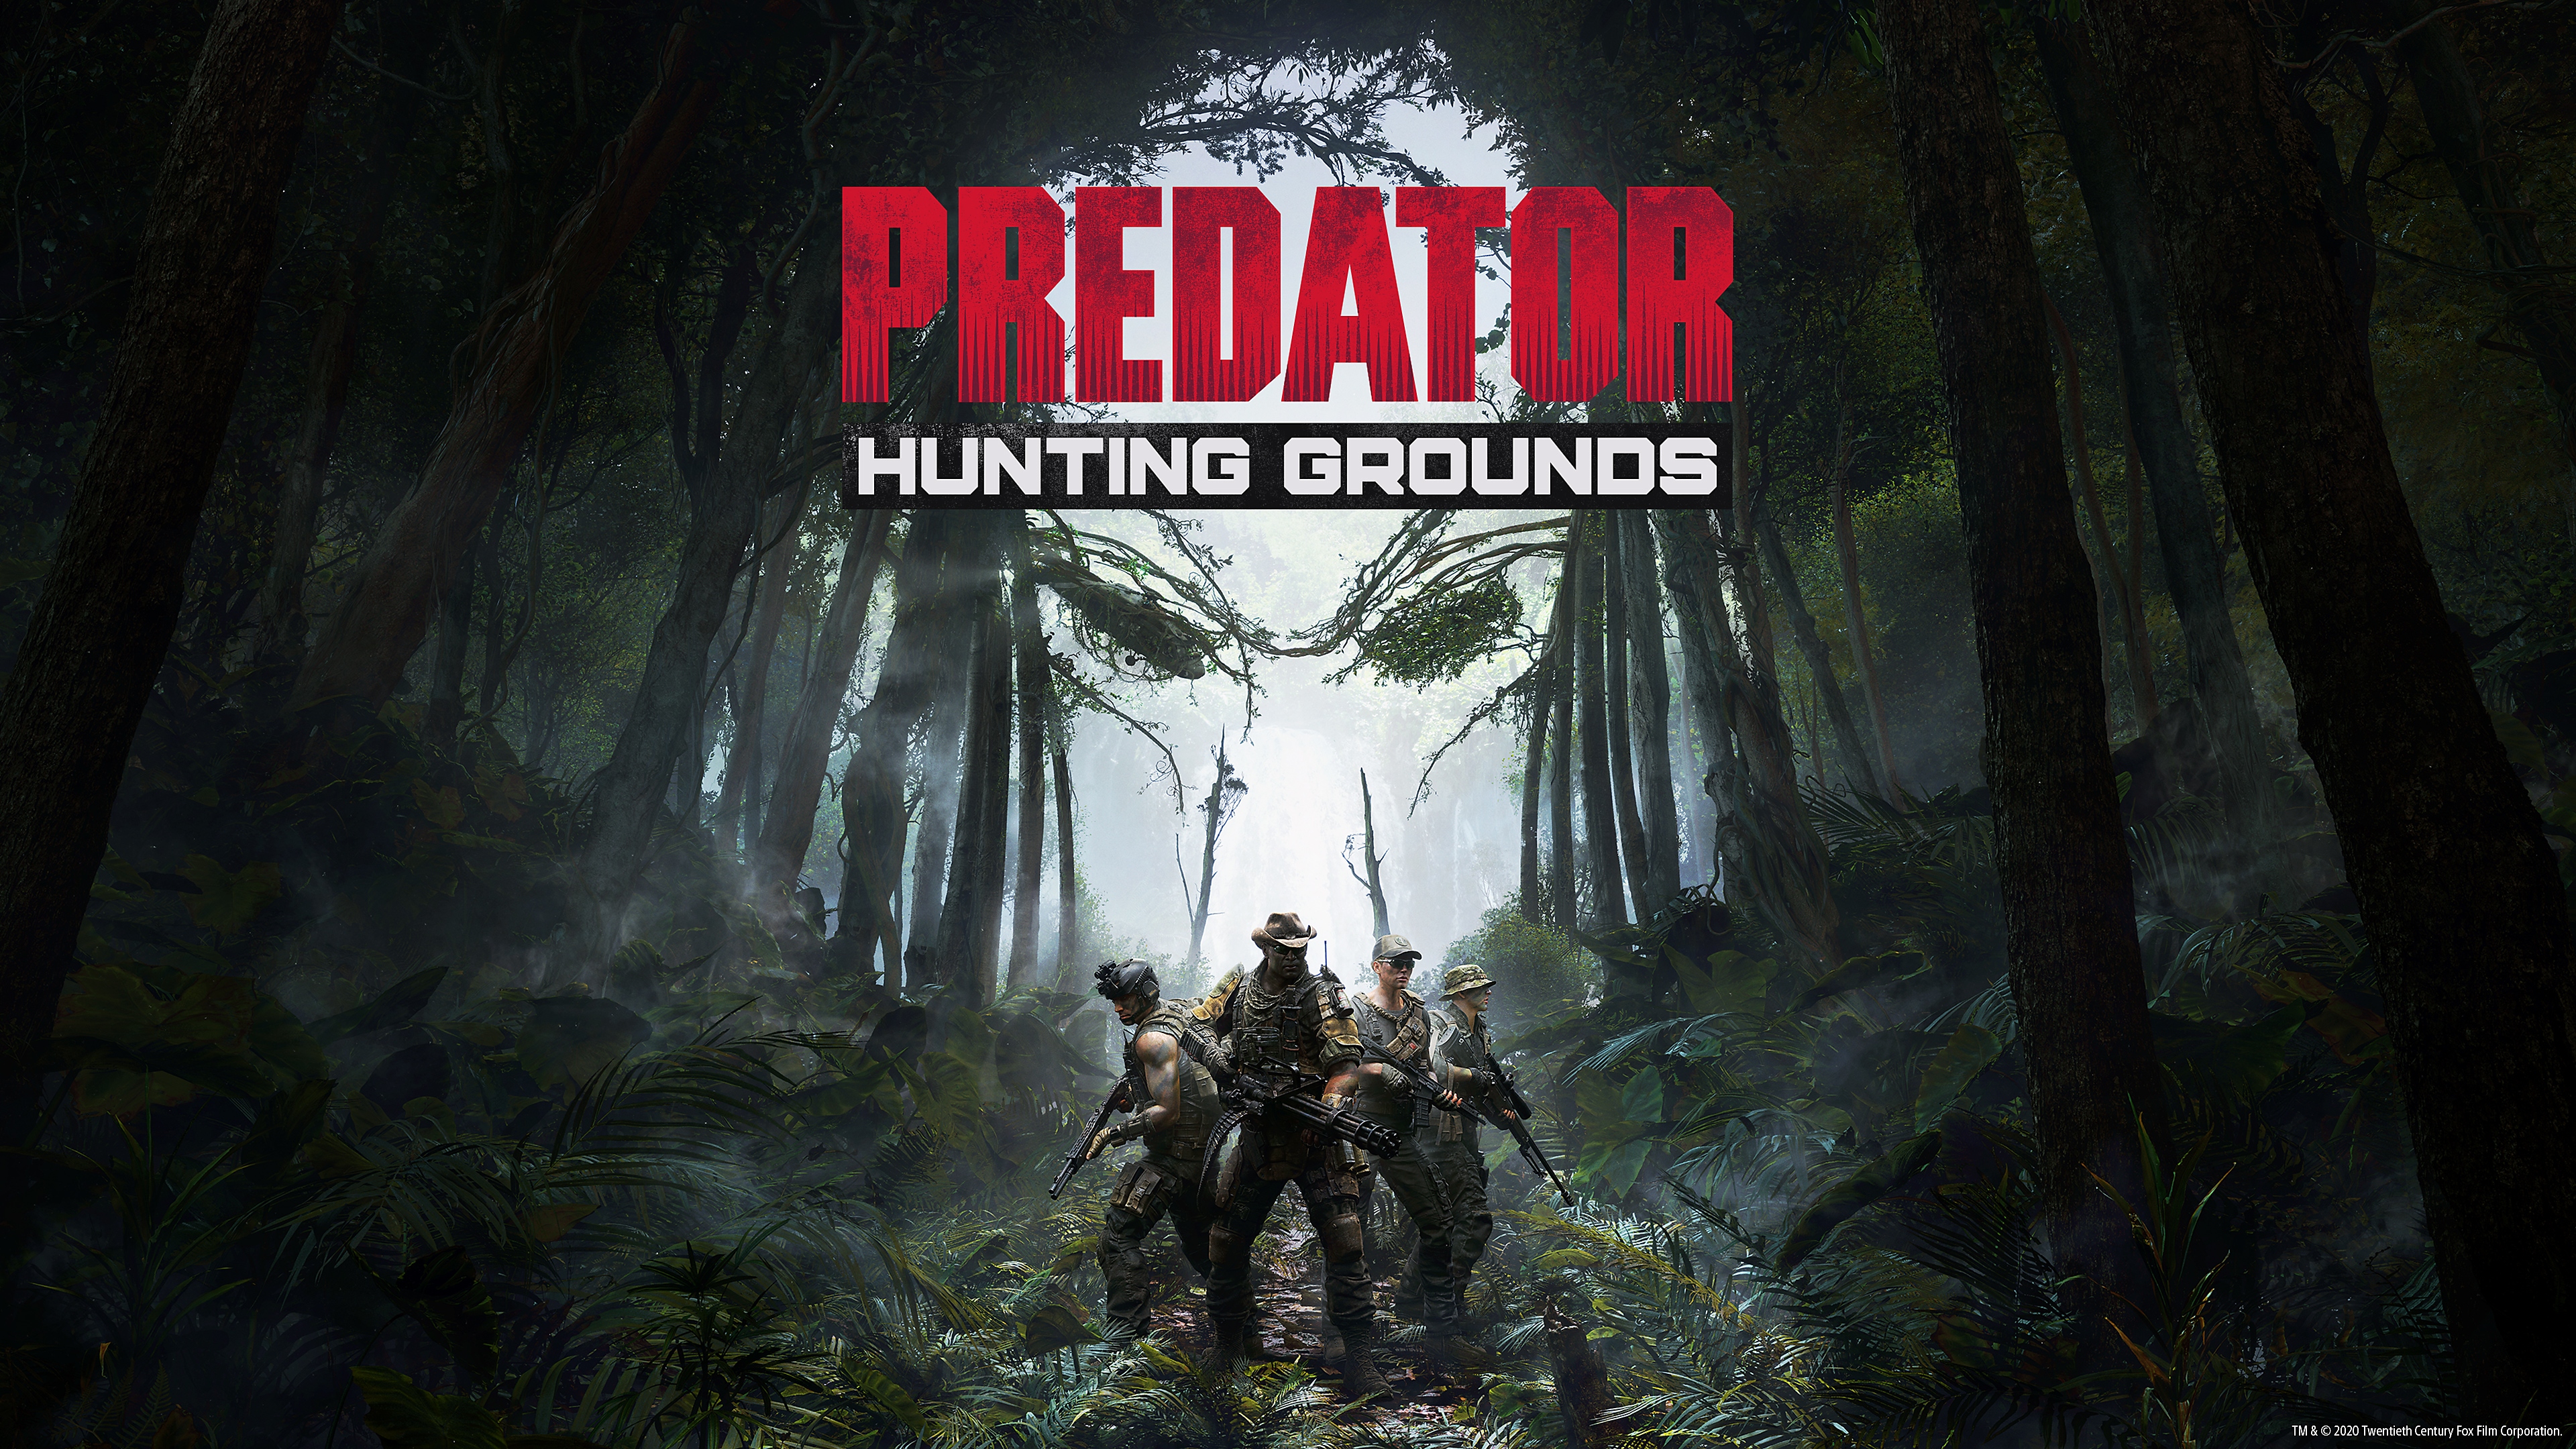 Predator: Hunting Grounds Fireteam standing in forest clearing while trees form the outline of The Predator